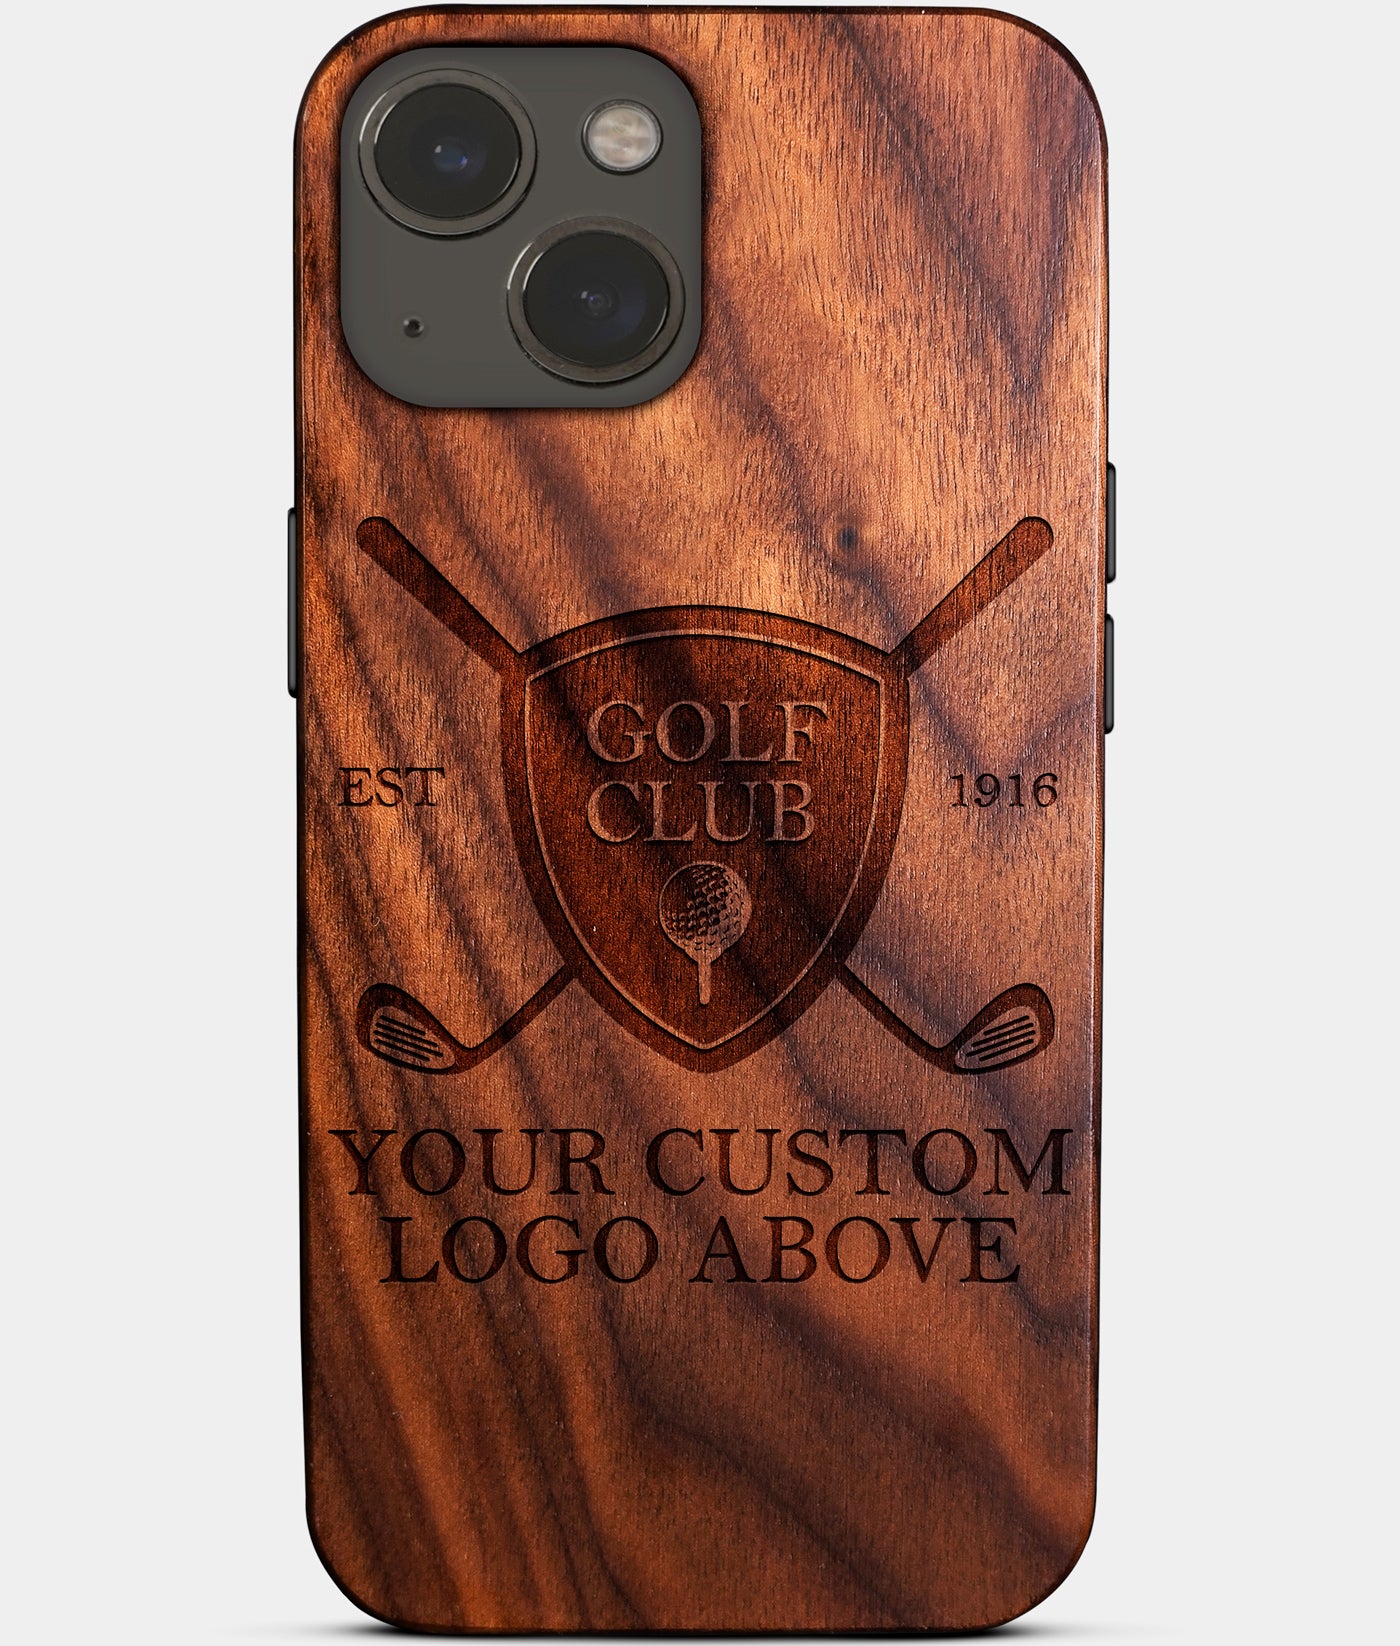 Company Golf Gifts - Tournament Gifts, Custom Country Club Accessories, Golf iPhone 14 Cases | Golf Gifts for husband, boyfriend golfer, 2022 Christmas gifts for golfer Personalized Golf Gifts For Men - Carved Wood Custom Golf Gift For Him - Monogrammed Unusual Golf iPhone 14 Covers